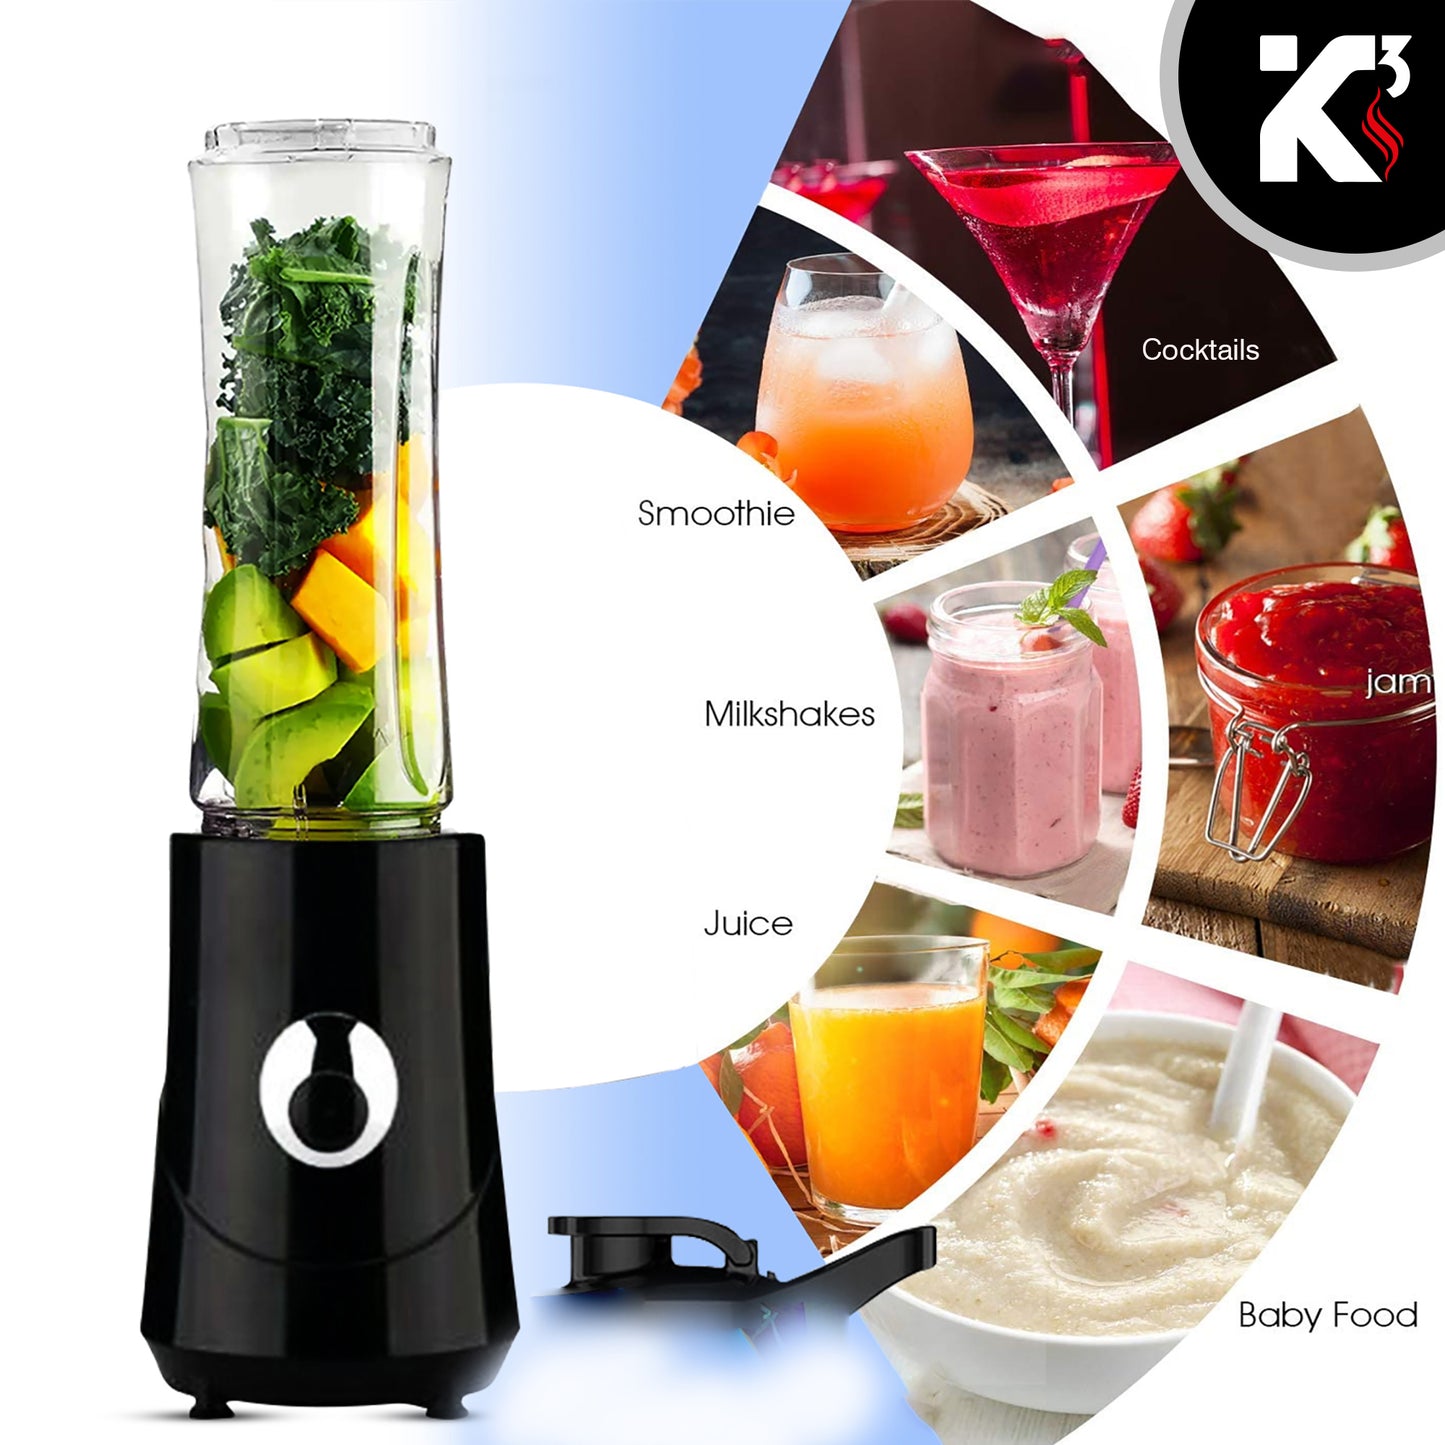 Personal Blender 20 Oz Capacity| BPA Free Food Processor with Portable Bottle 600ml| 160W with Stainless Blades for Powerful Blending Performance| Perfect for Shakes and Smoothies - 5C 421